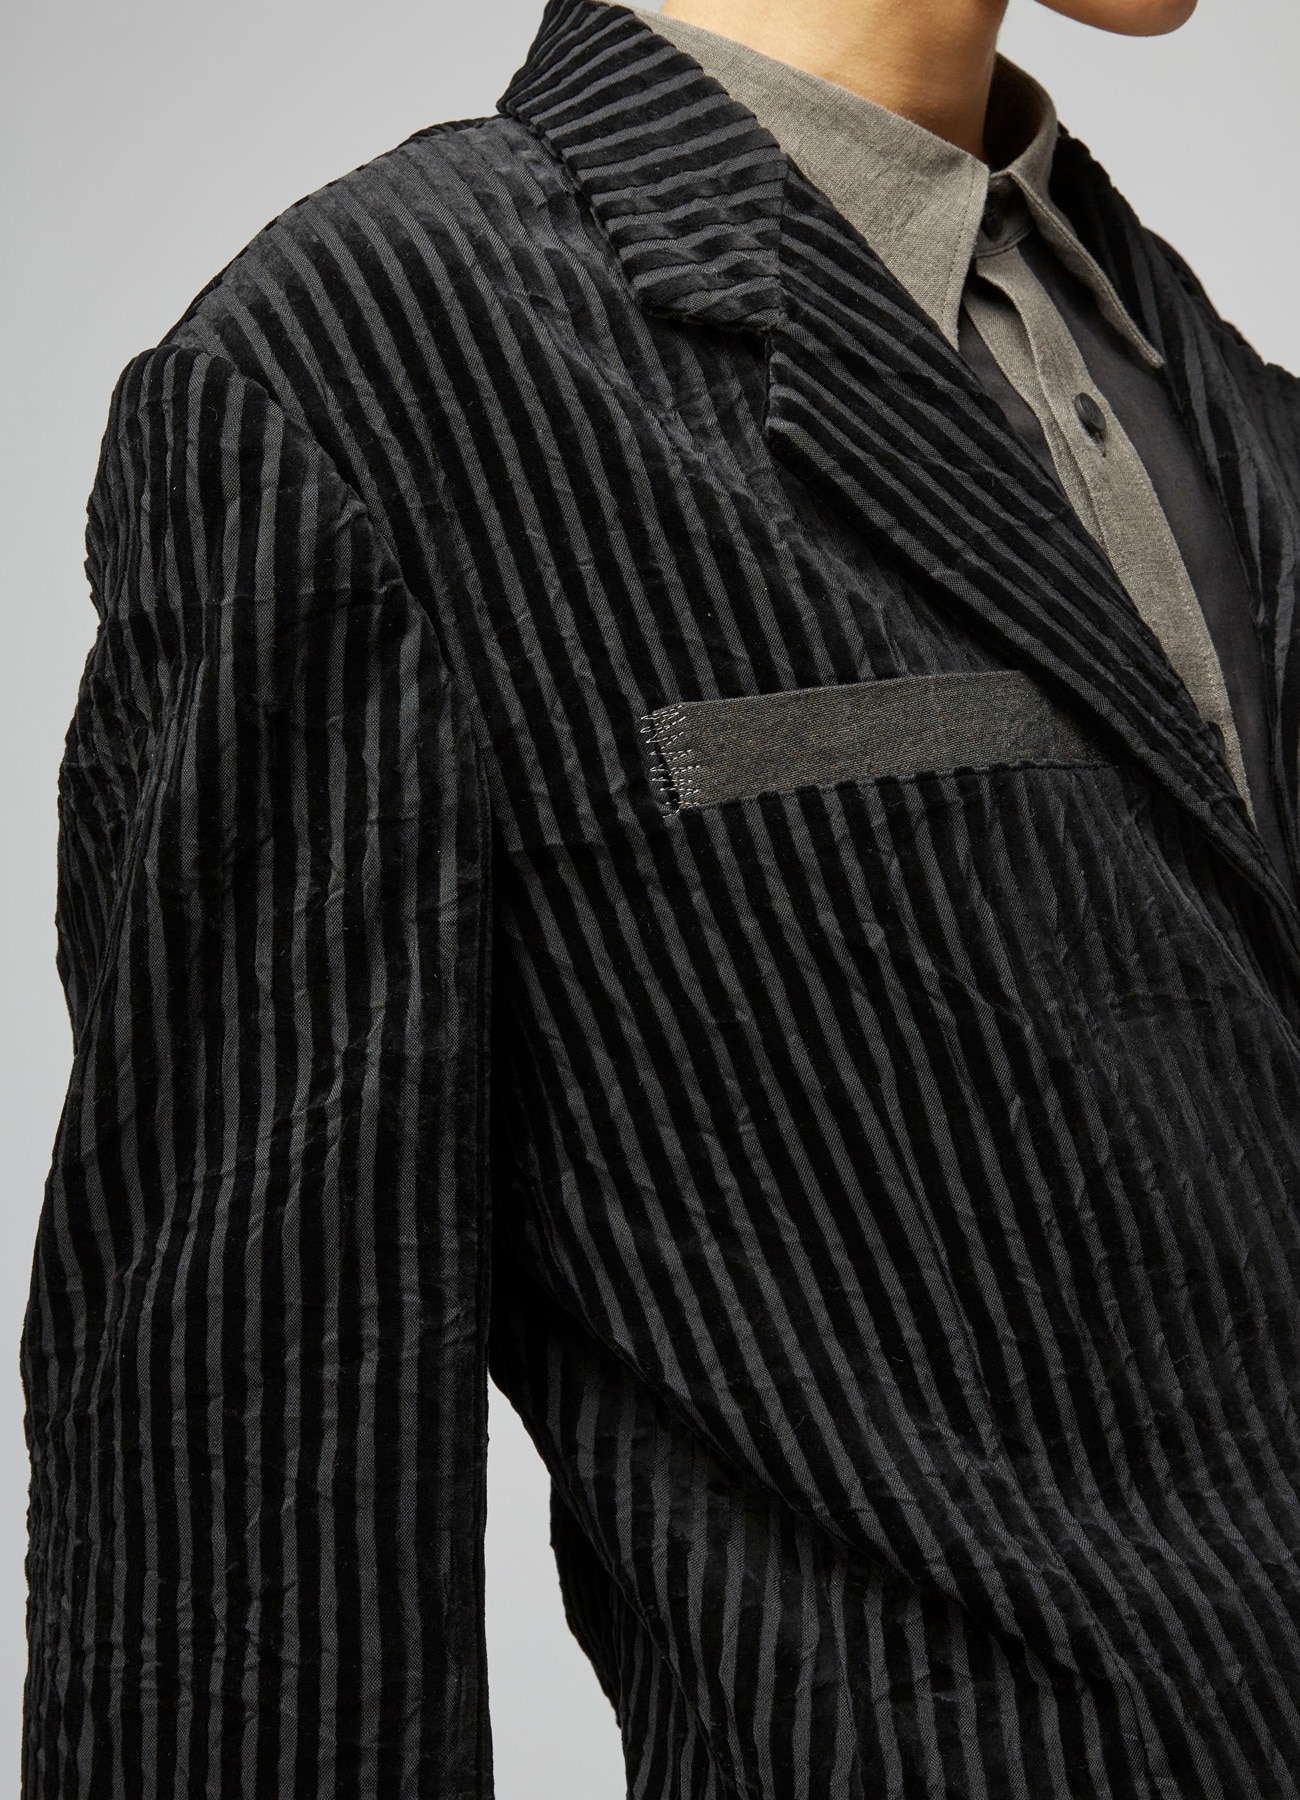 WRINKLED STRIPED 3-BUTTON JACKET WITH PEAK LAPELS(S GREY): Y's for 